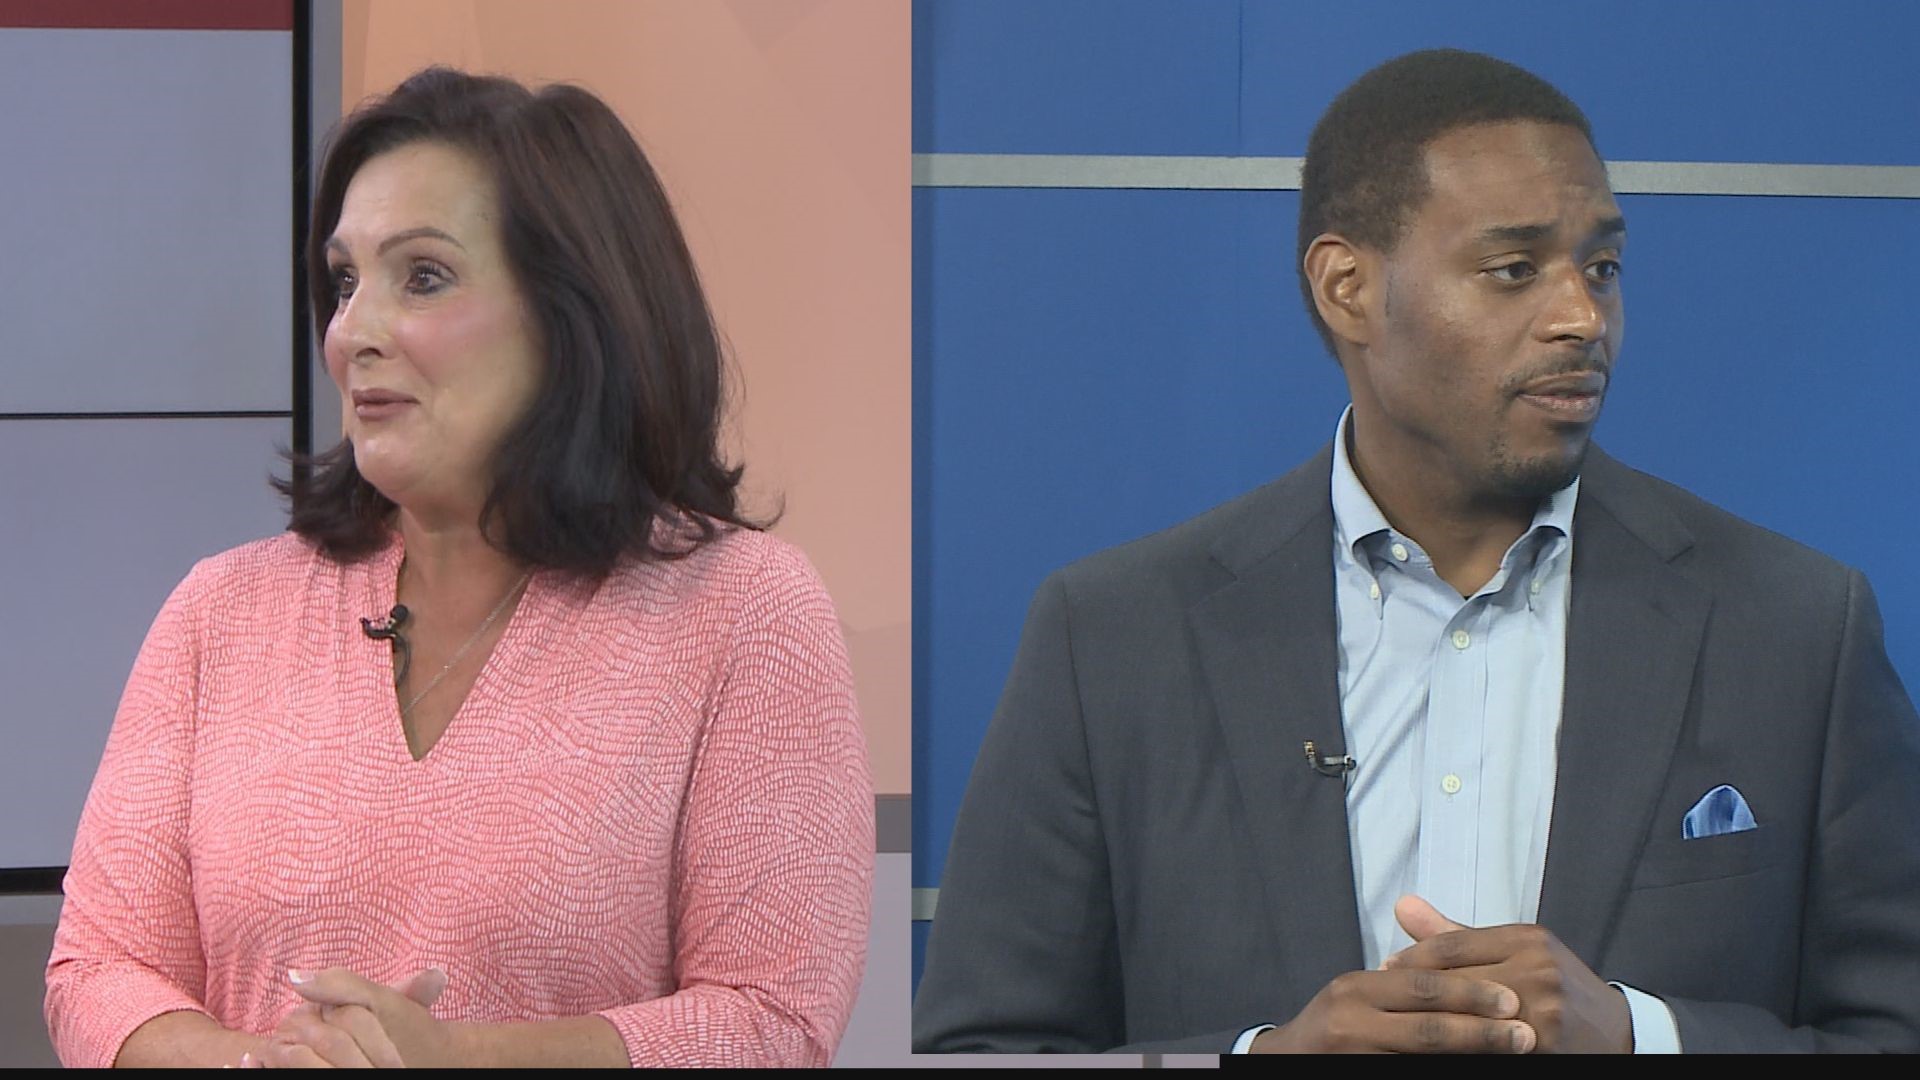 Incumbent Mayor Vaughan and Greensboro city council member Justin Outling express their top goals if elected.